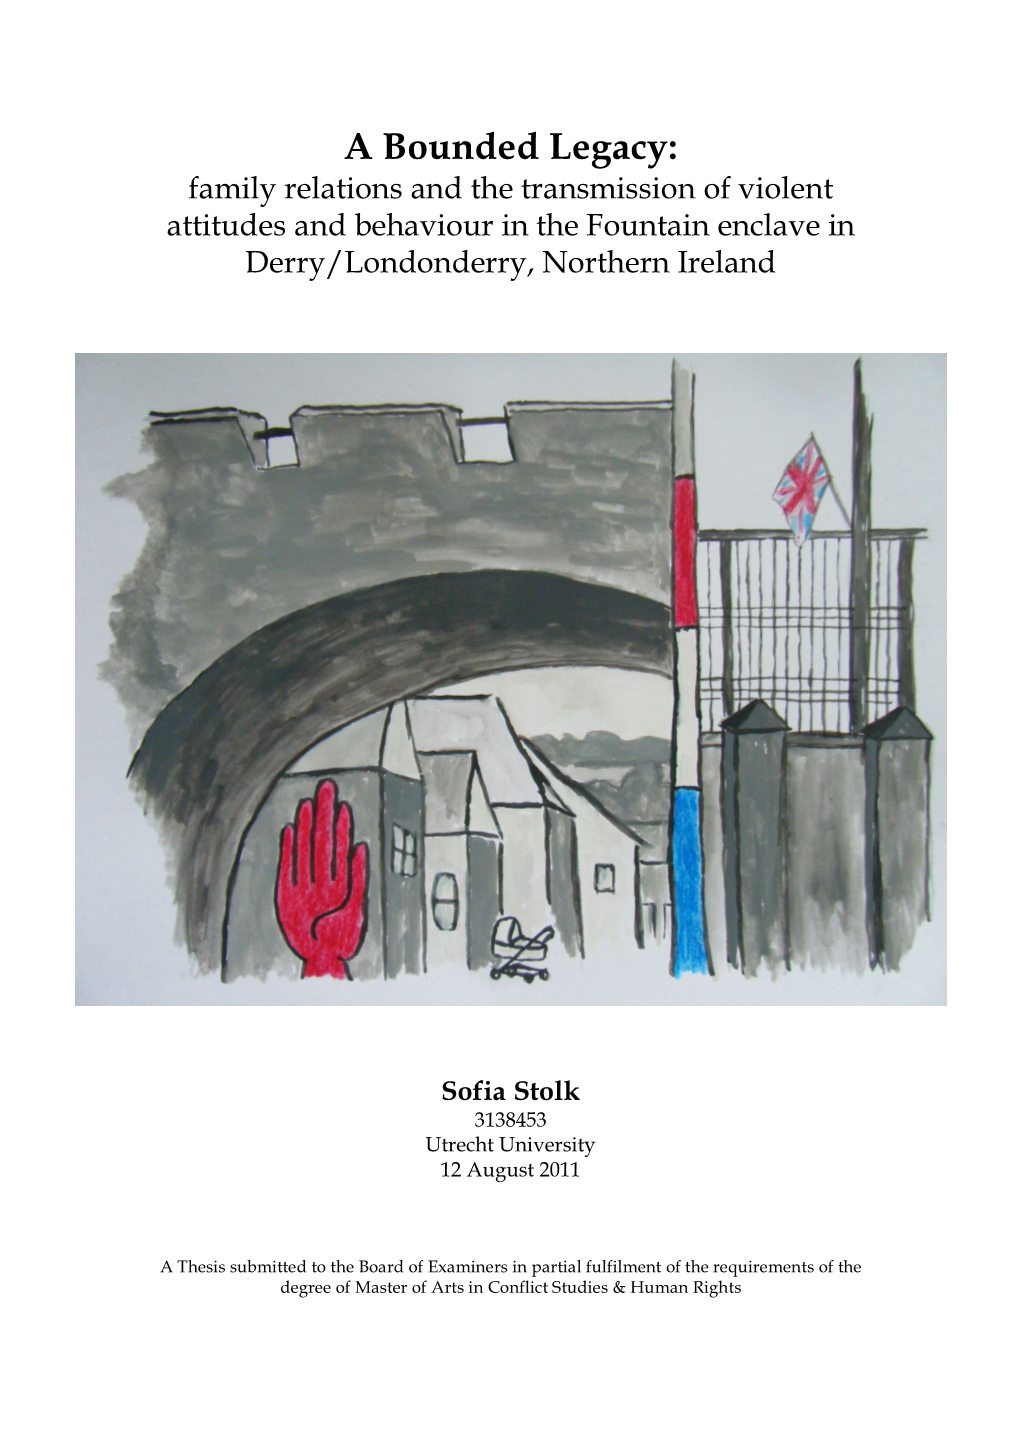 A Bounded Legacy: Family Relations and the Transmission of Violent Attitudes and Behaviour in the Fountain Enclave in Derry/Londonderry, Northern Ireland